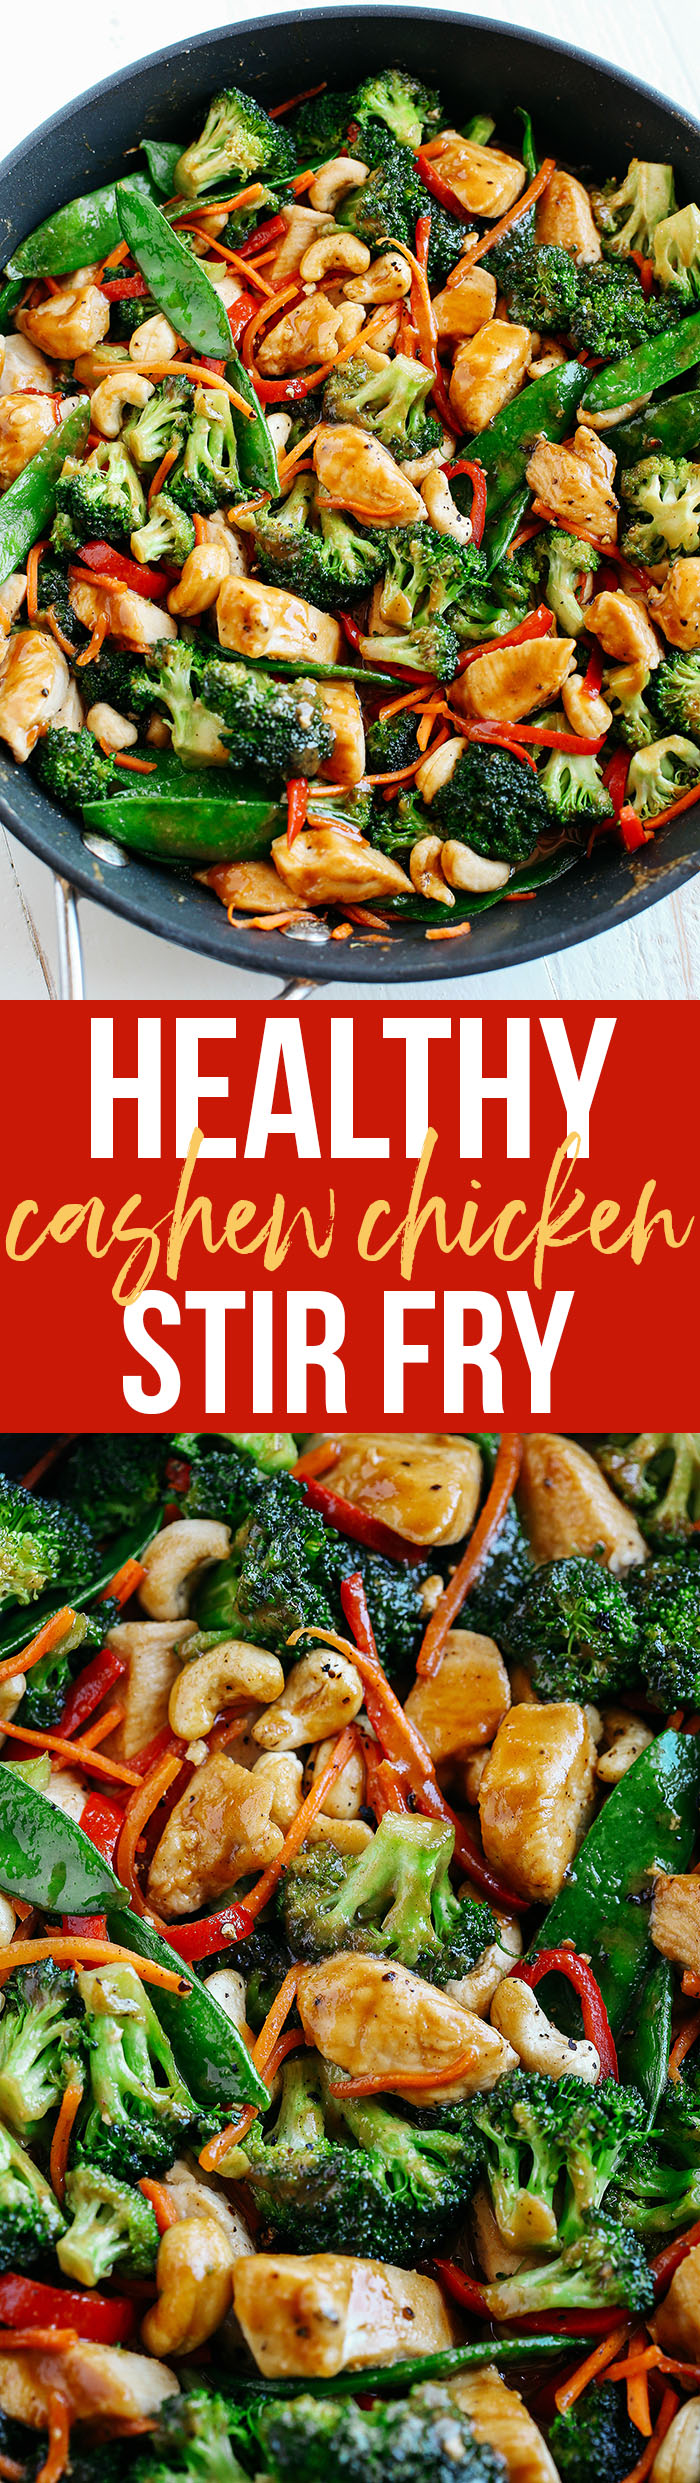 This EASY 20 minute One Skillet Cashew Chicken Stir Fry is the perfect weeknight meal that is healthy, full of flavor and perfect for your weekly meal prep!